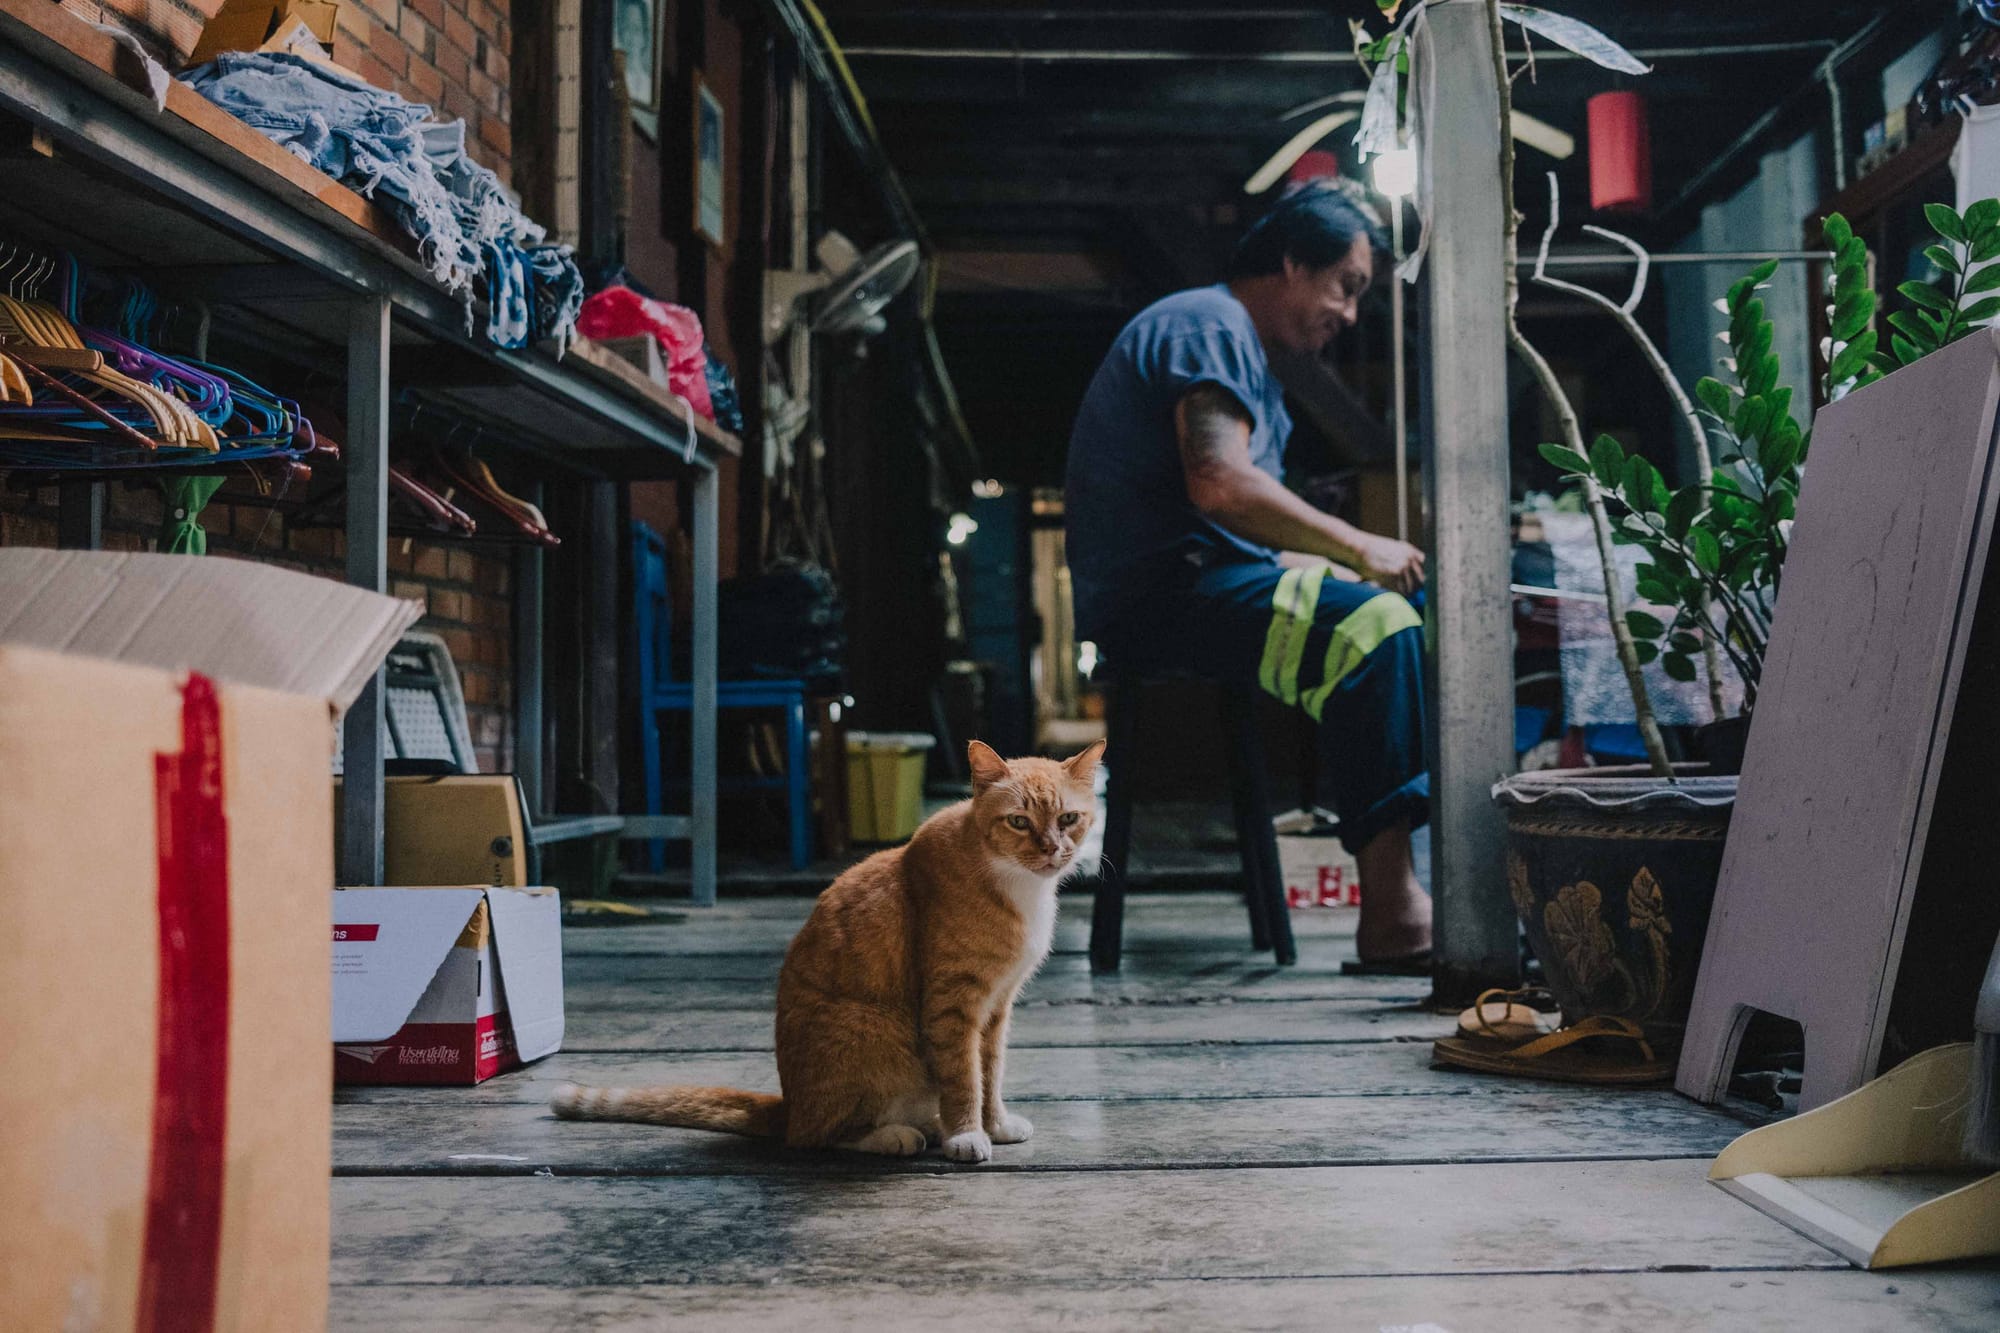 A red cat sits in the foreground, looking directly at the camera, with a man sitting behind him working on his craft